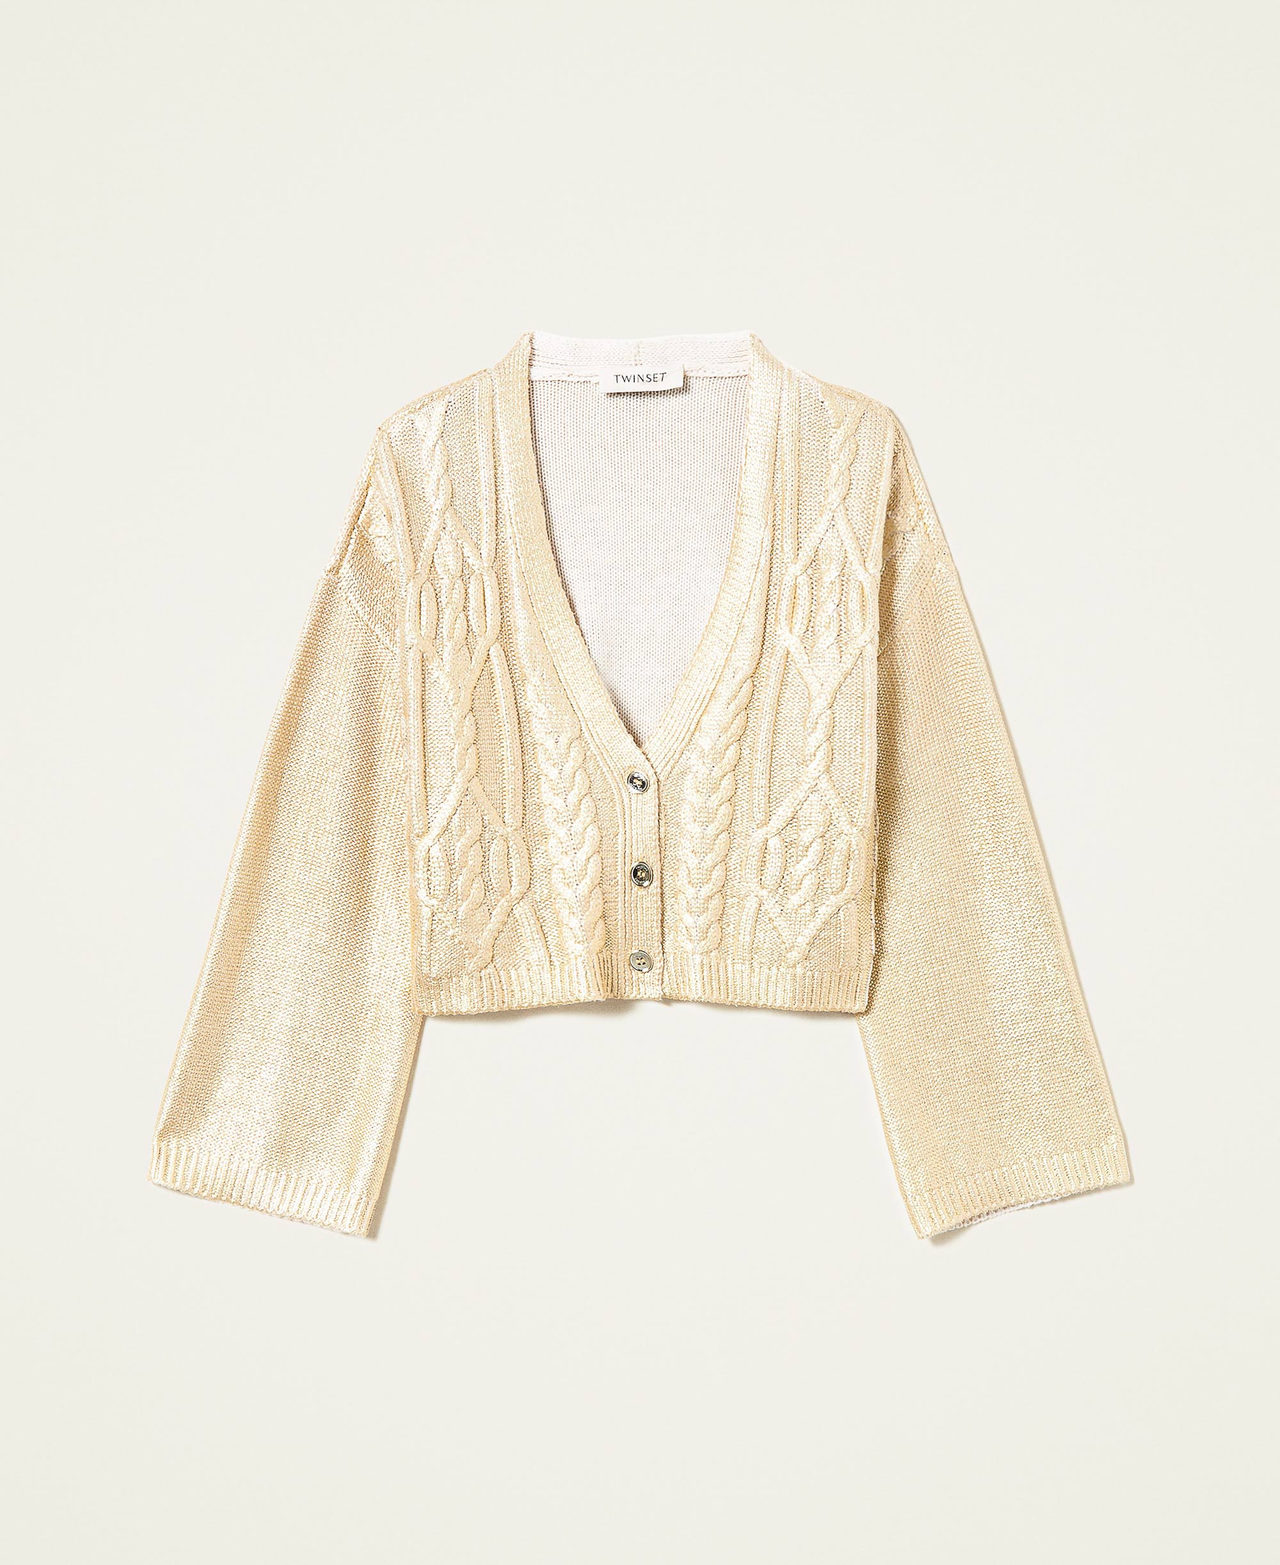 Laminated cable knit cardigan Girl, Yellow | TWINSET Milano